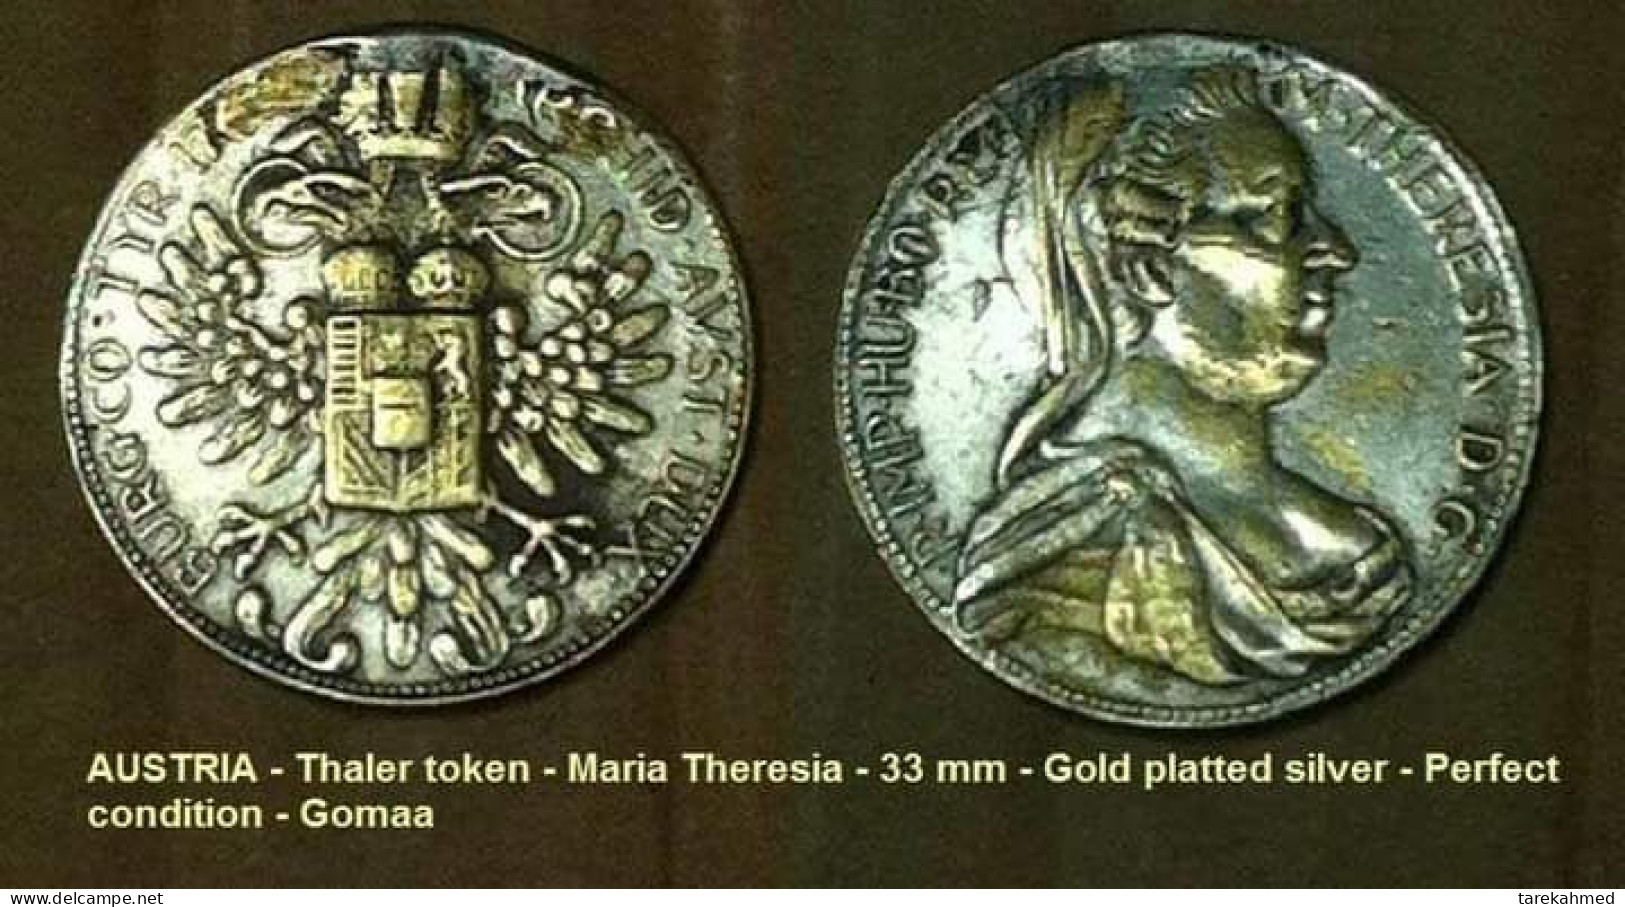 AUSTRIA - Thaler Medal - Maria Theresia, 1780, - 33 Mm - Gold Platted Silver - Perfect Condition.gomaa - Monarchia / Nobiltà